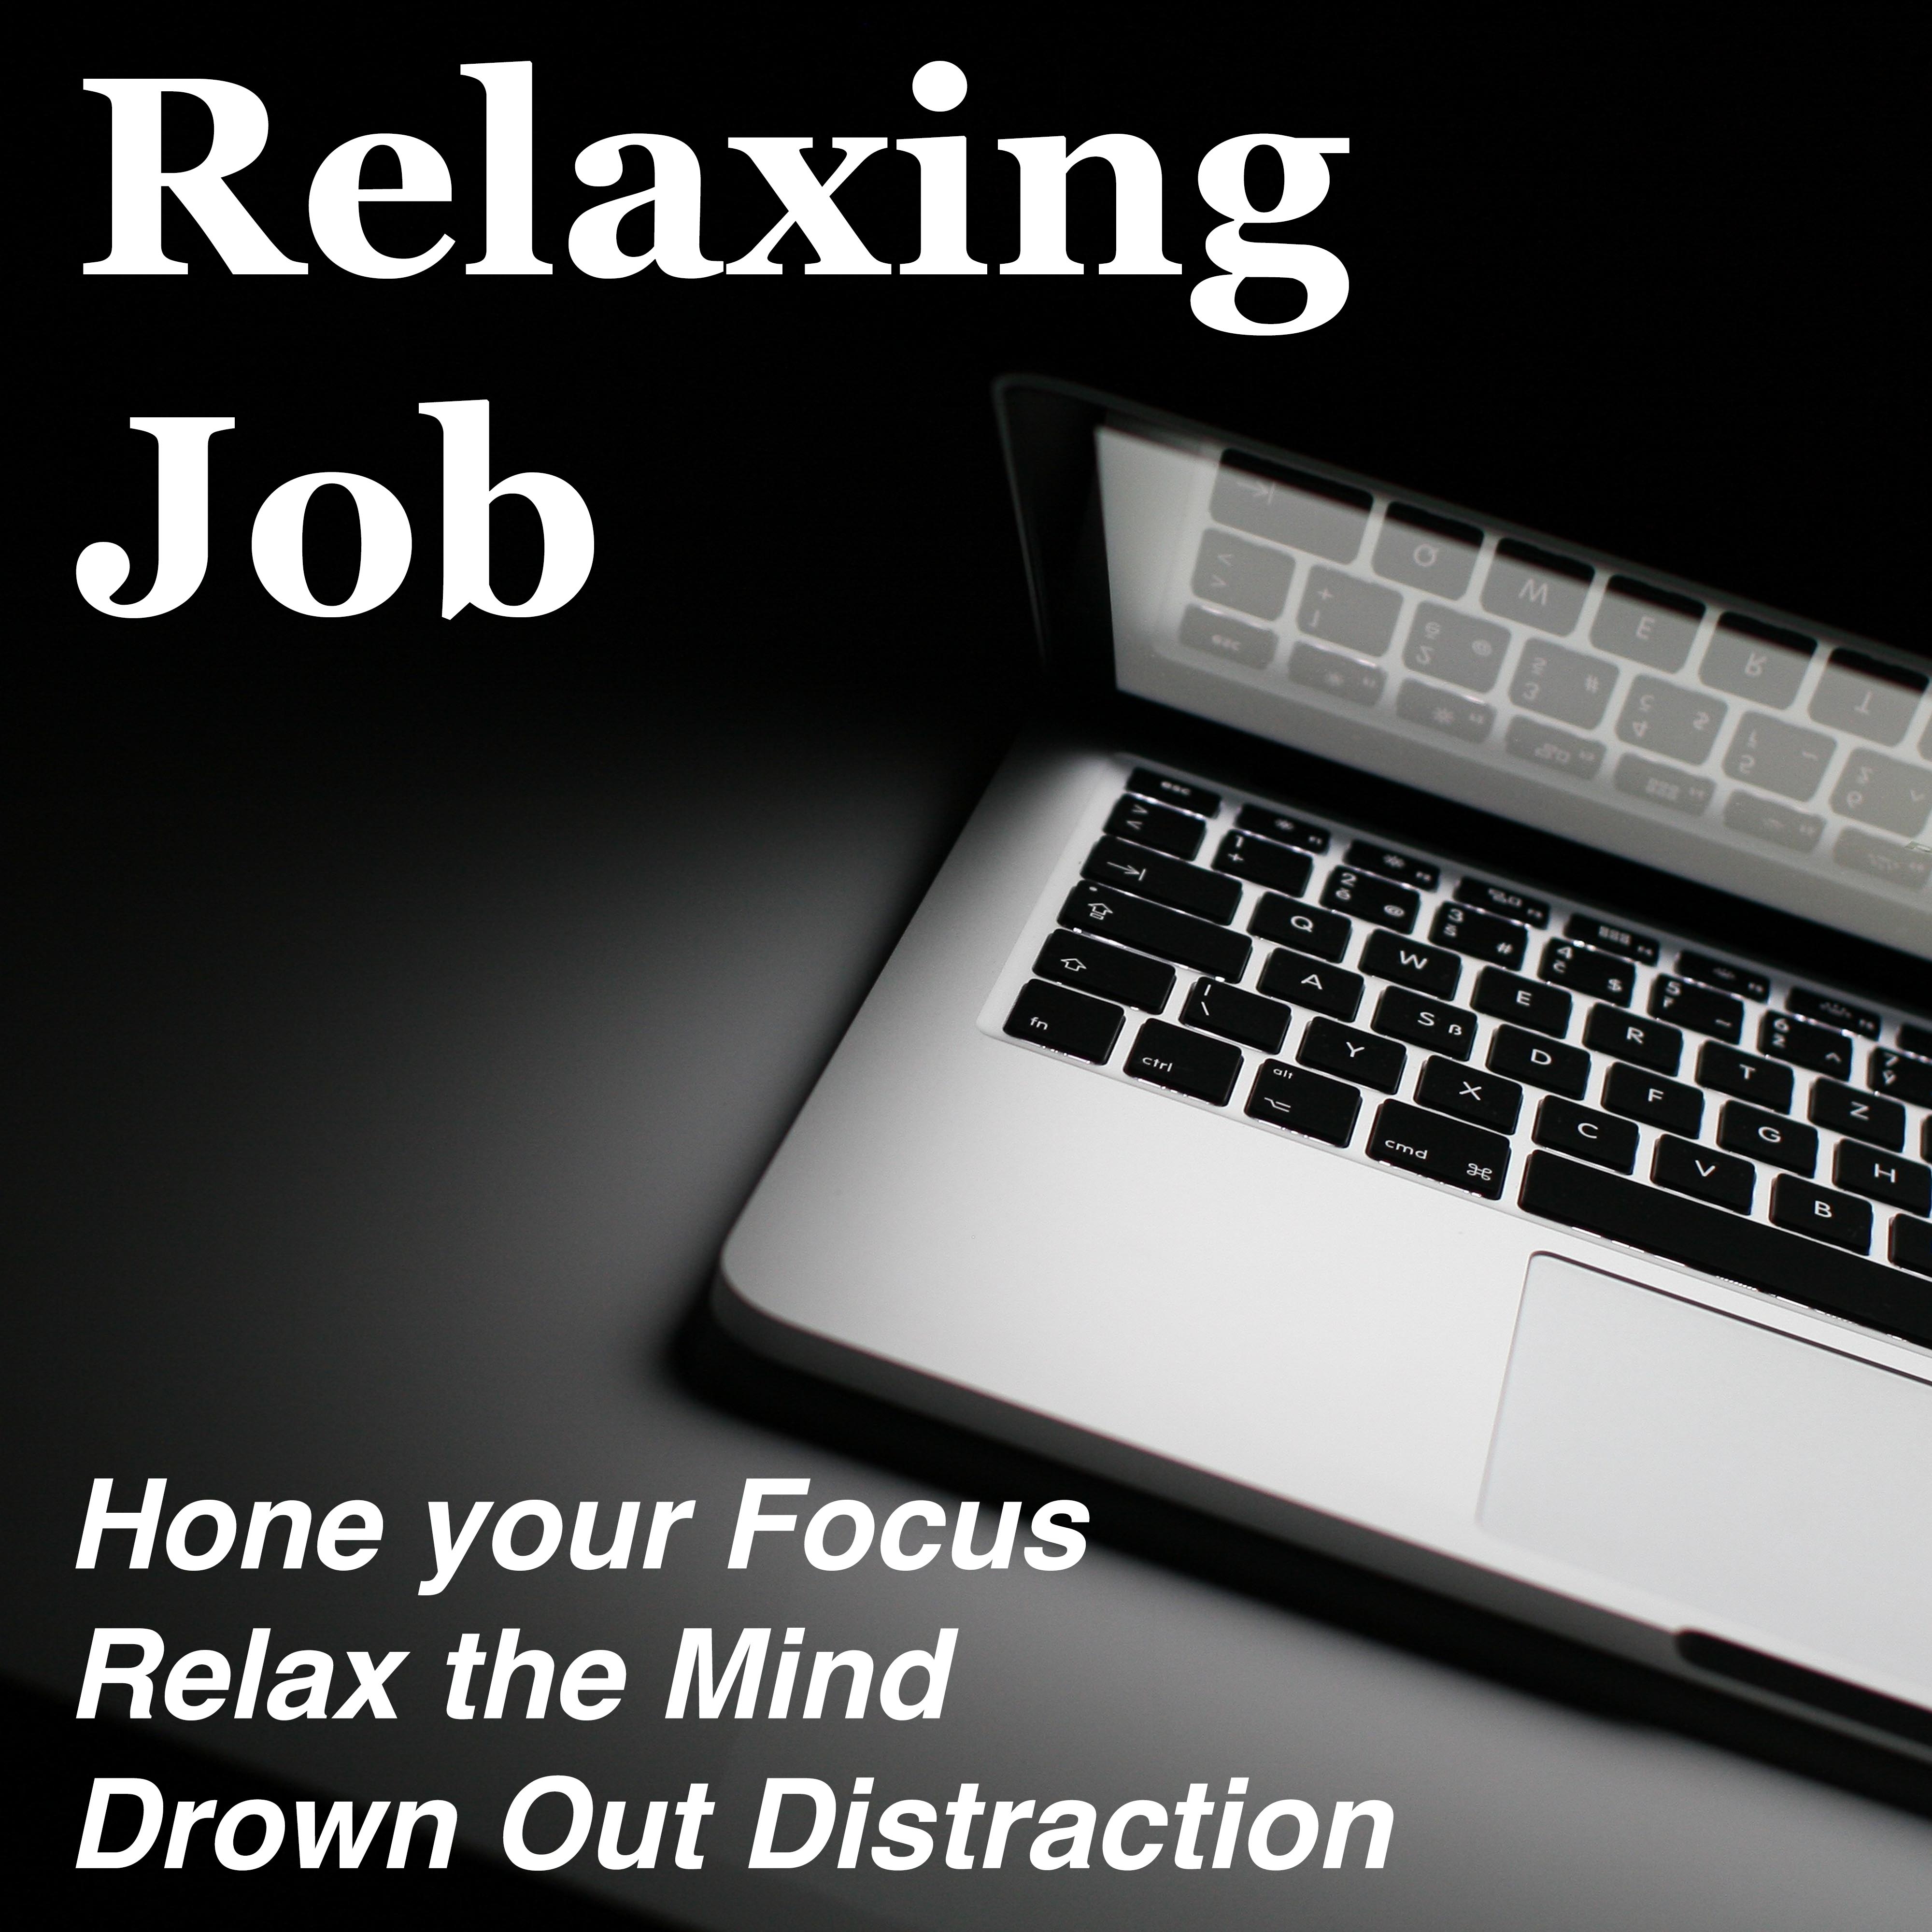 Relaxing Job - The Best Music to Hone your Focus, Relax the Mind and Drown Out Distraction to Create a Productive Environment in your Business